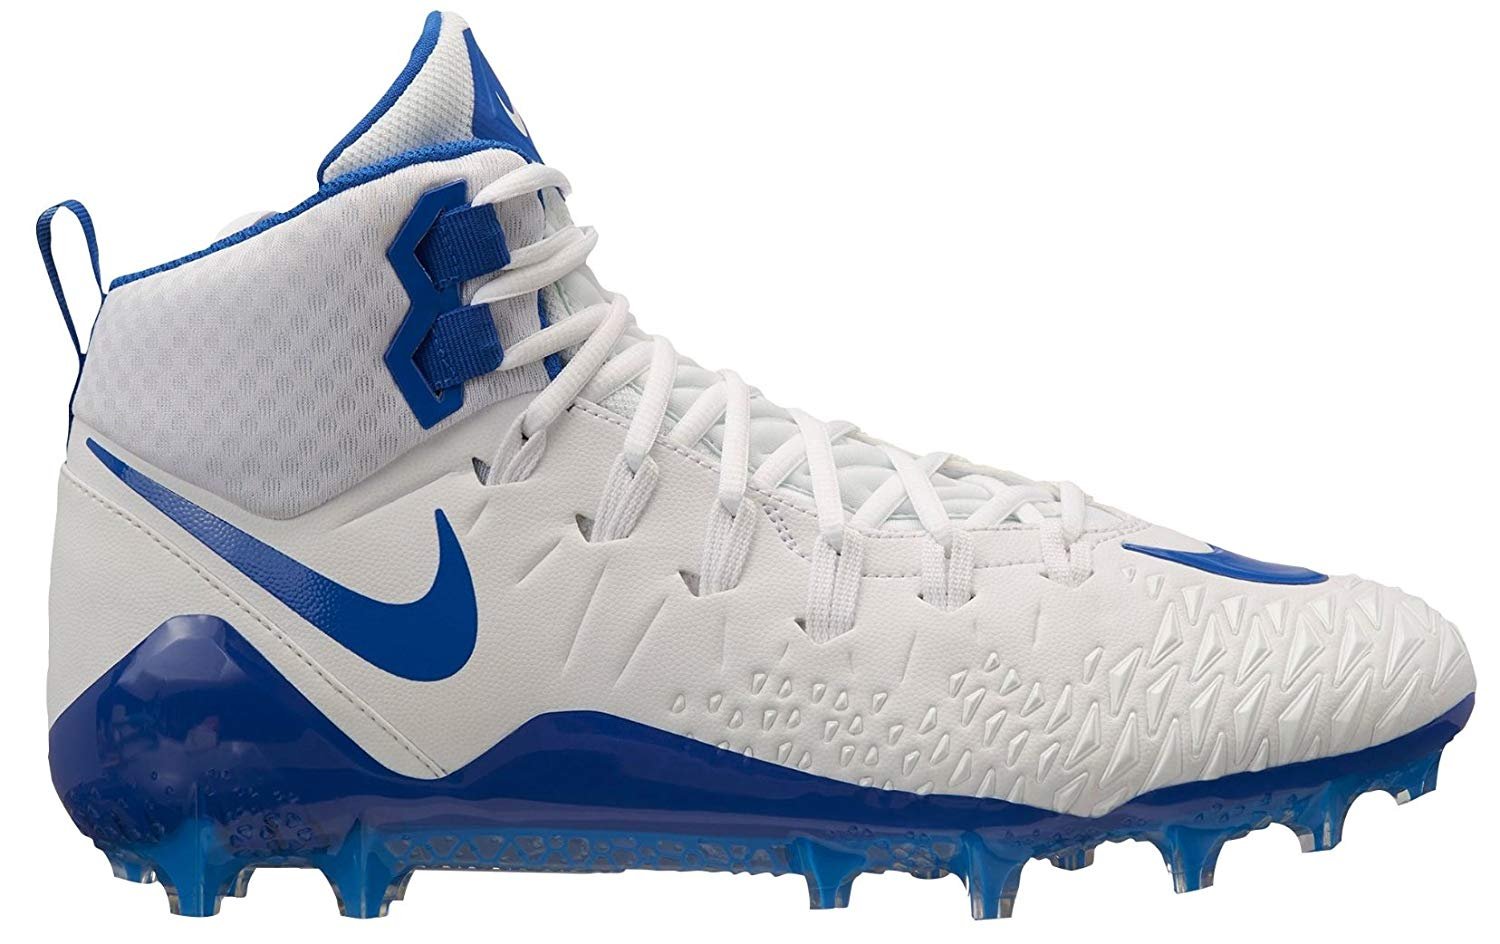 Nike Men's Force Savage Pro Football Cleat - image 1 of 4